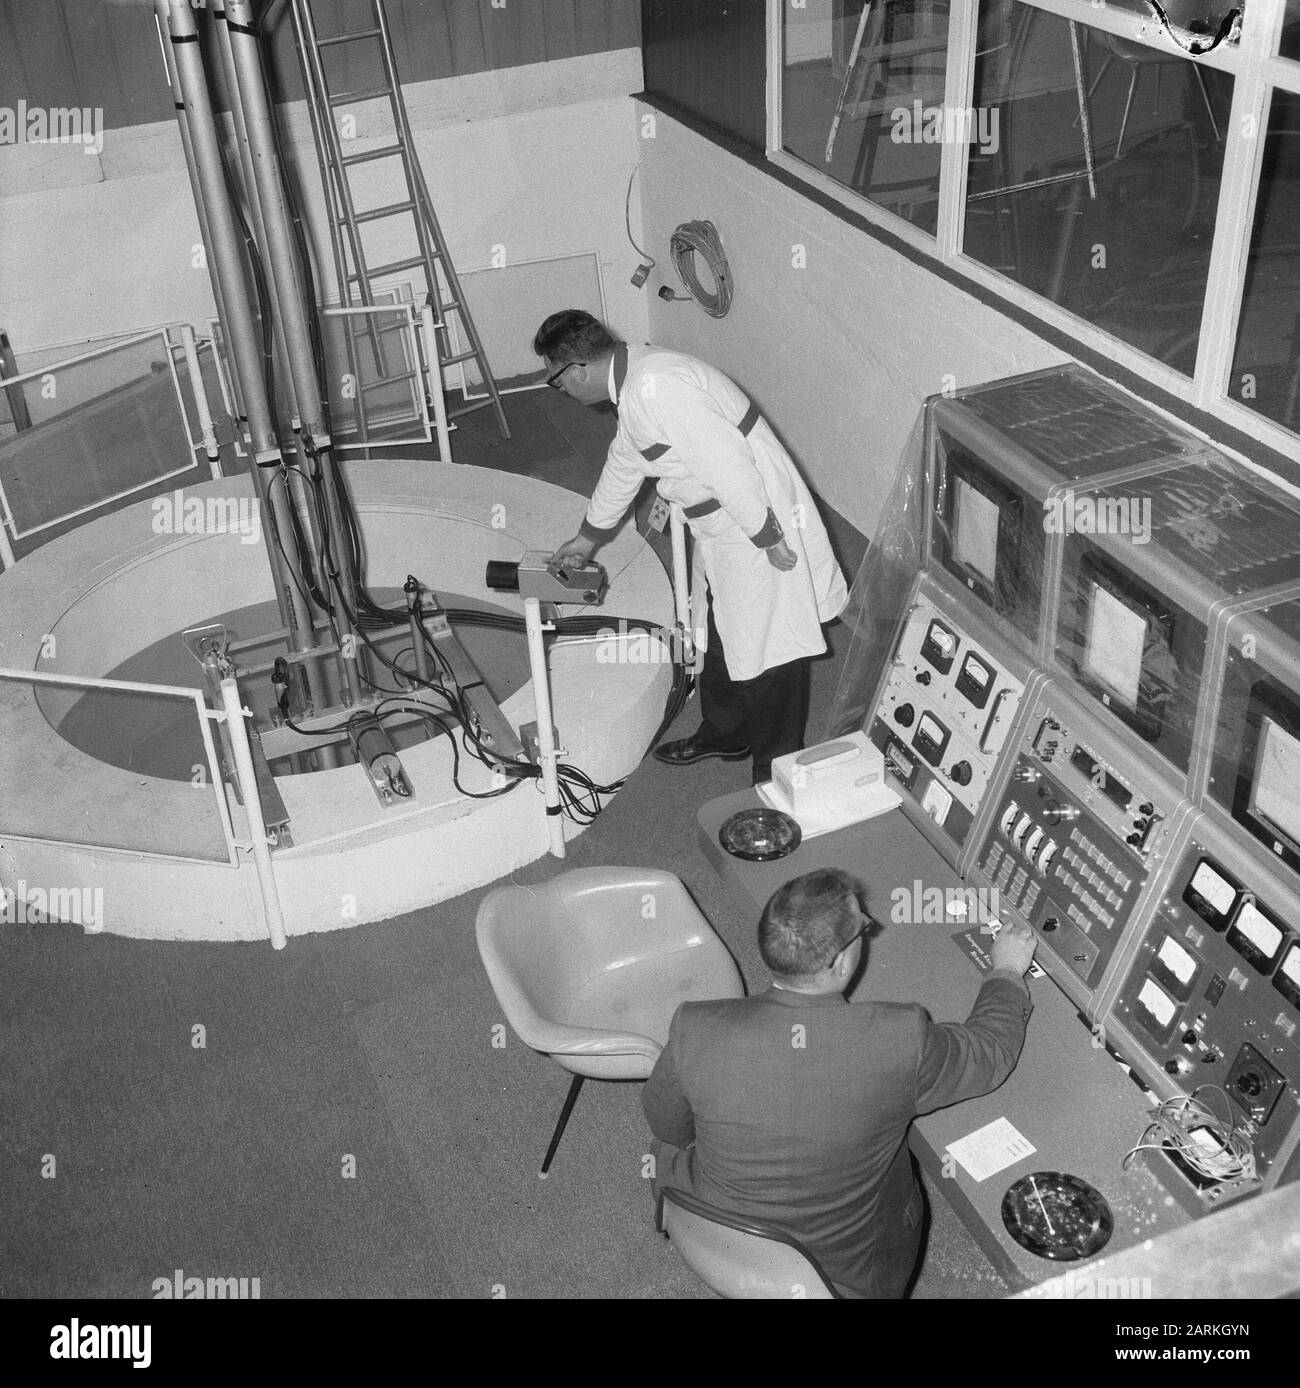 Exhibition Working with atoms, in Utrecht, the small trainings and research reactor with control panel Date: February 28, 1966 Location: Utrecht Keywords: atoms, exhibitions  : Nijs, Jac. de/Anefo Stock Photo